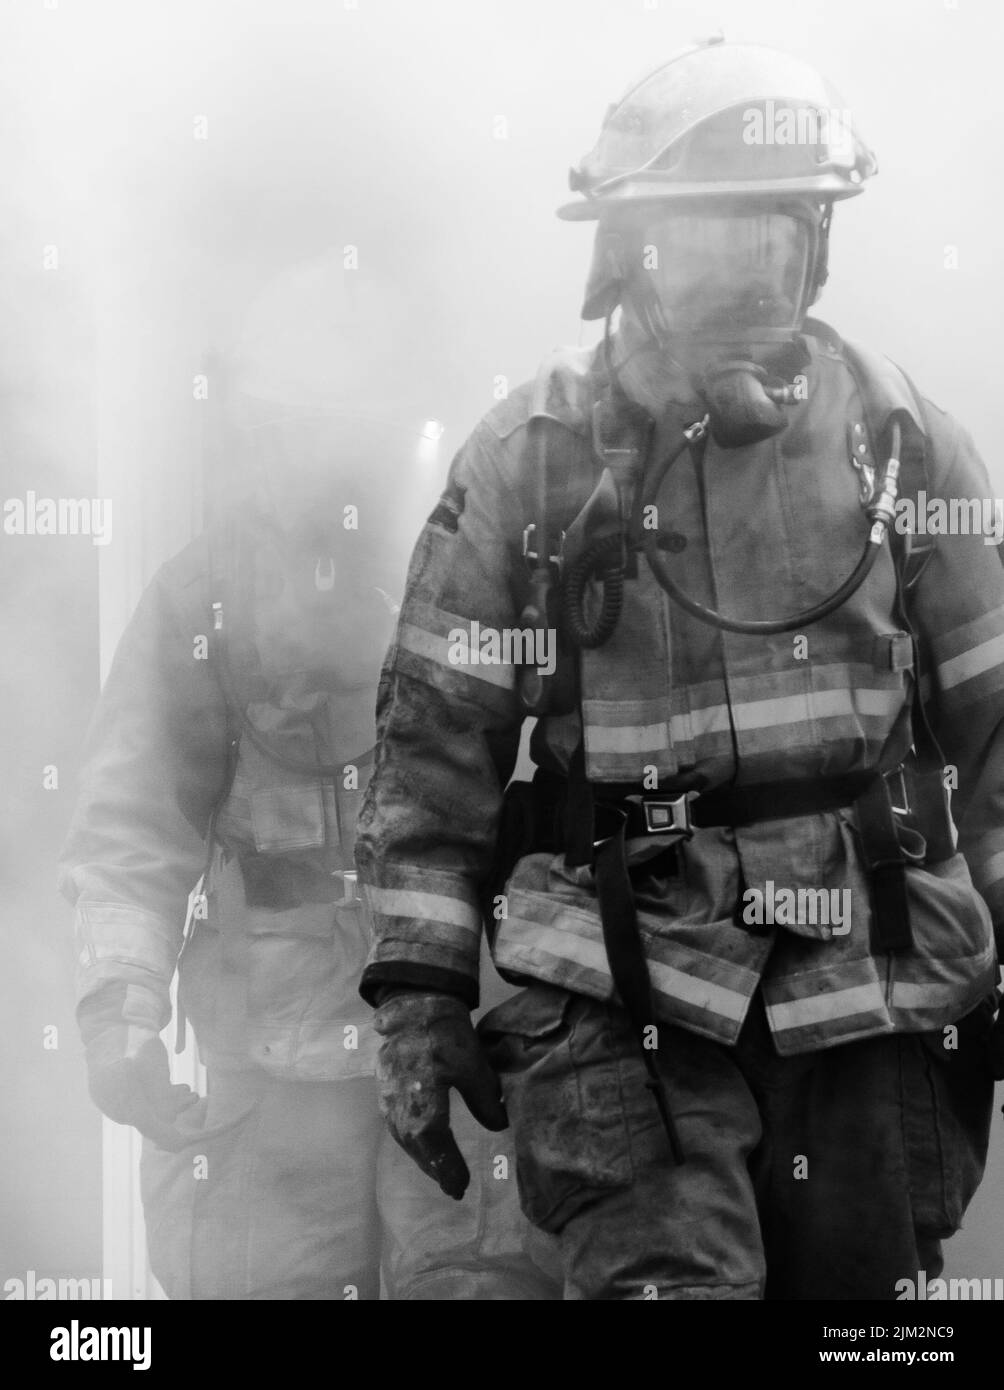 Firefighter exiting a burning building Stock Photo